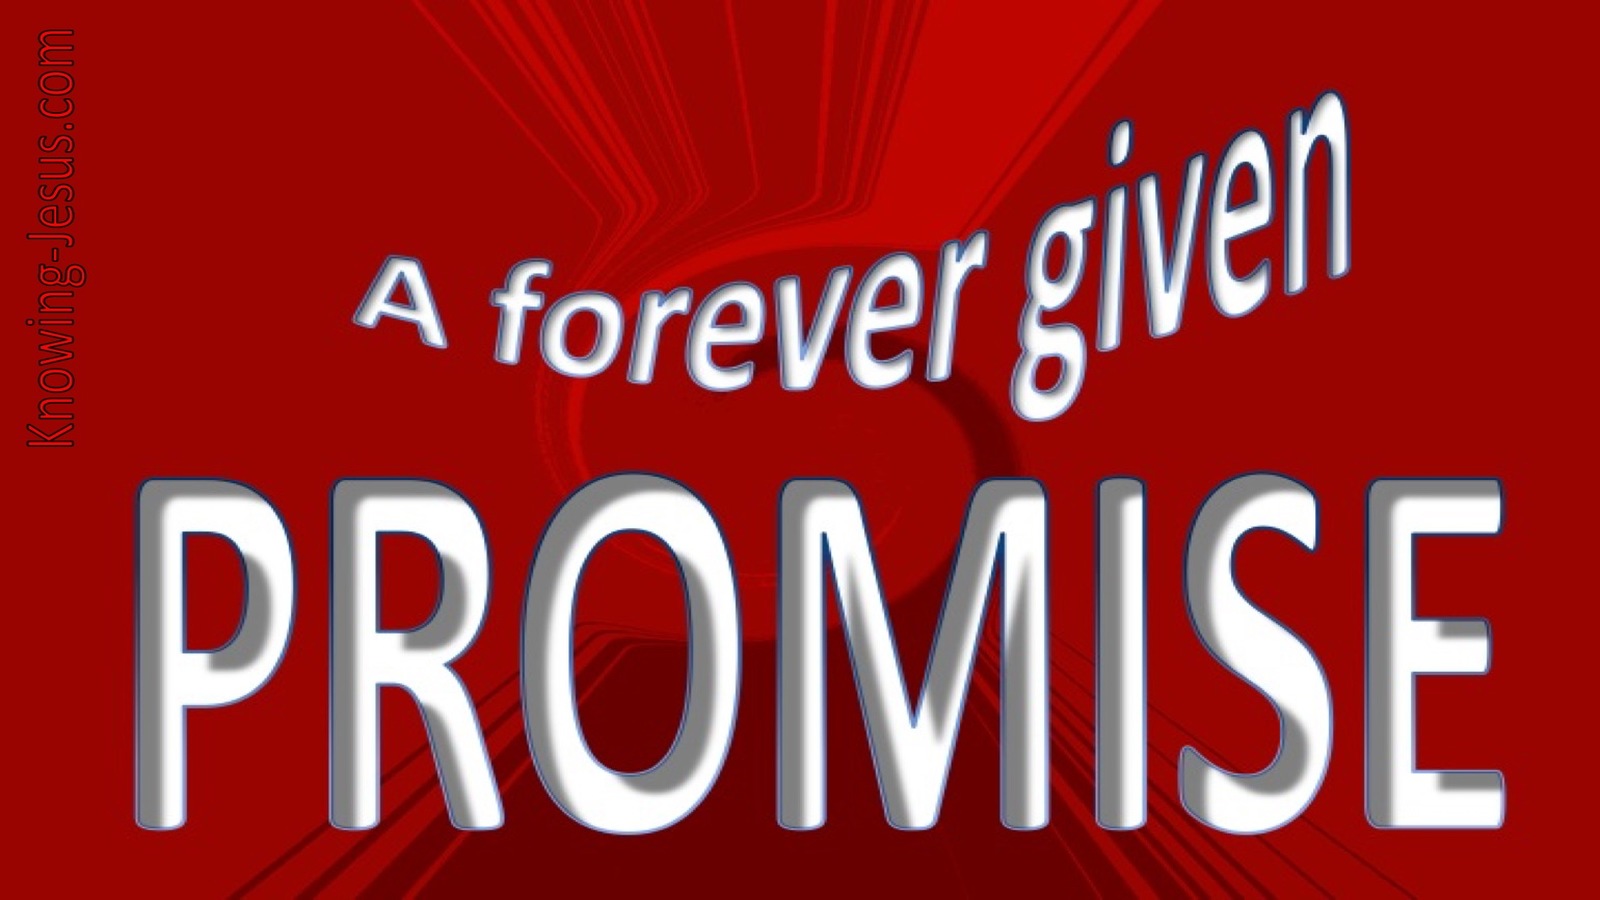 devotional03-27 A Forever Given Promise (devotional)03-27 (red)